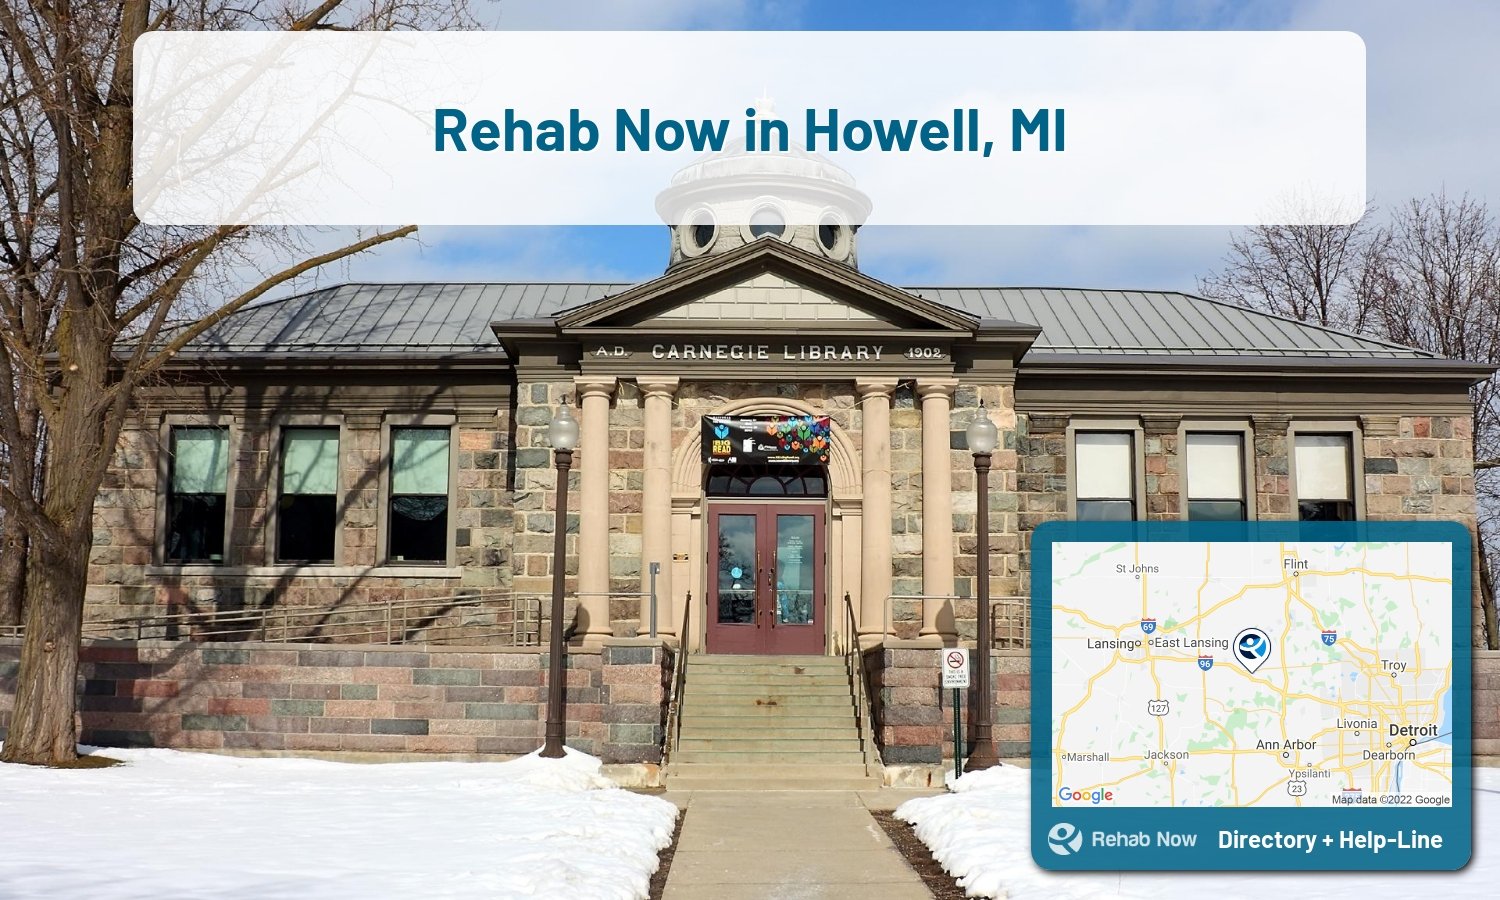 Drug rehab and alcohol treatment services nearby Howell, MI. Need help choosing a treatment program? Call our free hotline!